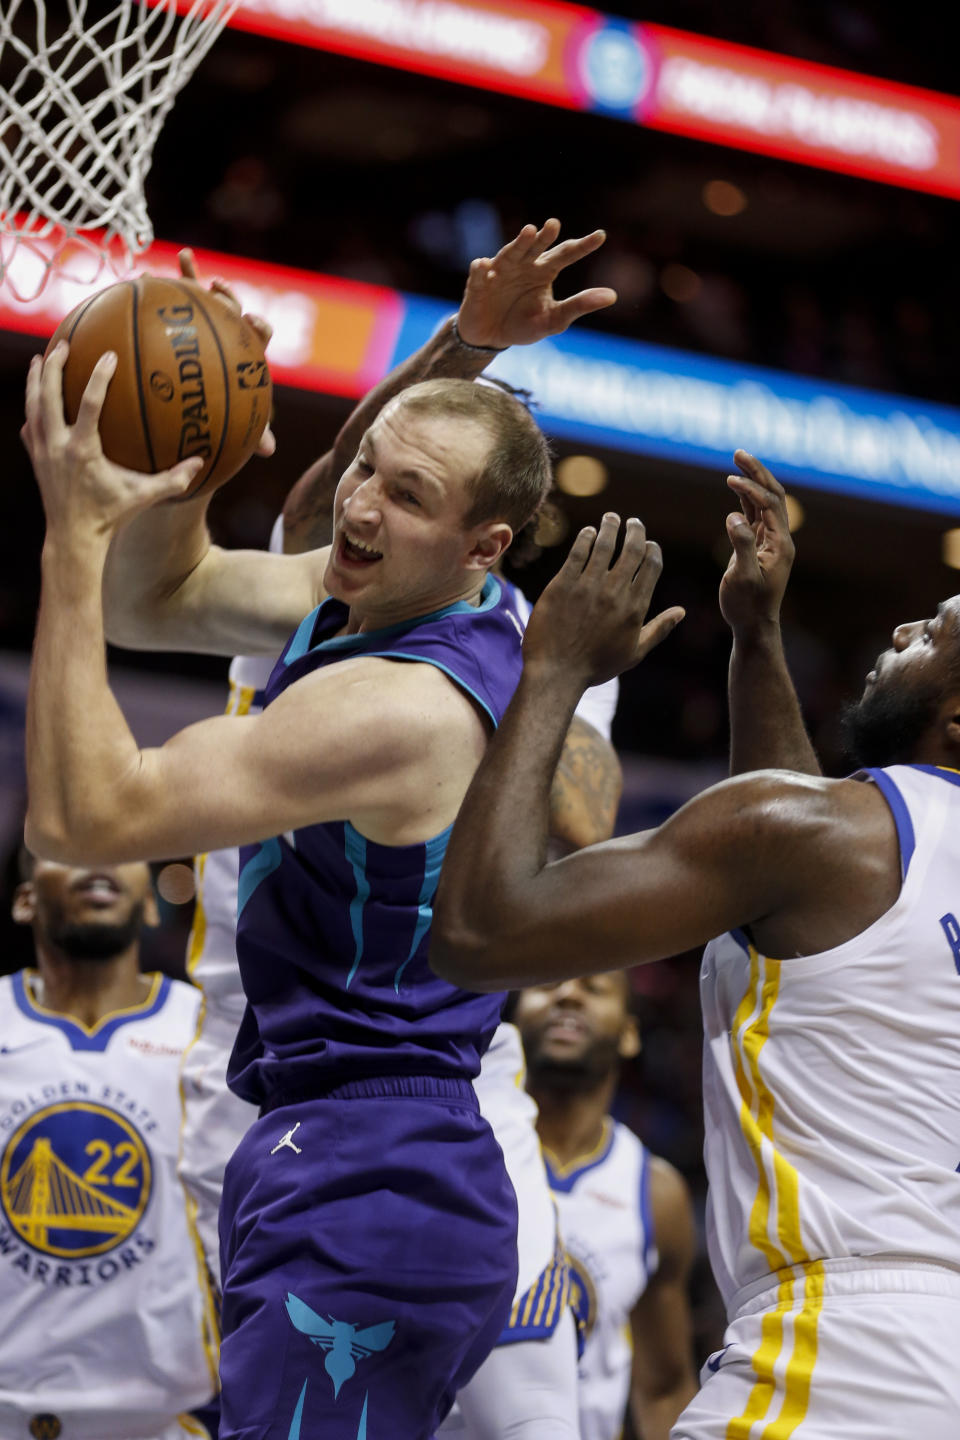 Charlotte Hornets forward Cody Zeller pulls down an offensive rebound during the first half of the team's NBA basketball game against the Golden State Warriors in Charlotte, N.C., Wednesday, Dec. 4, 2019. (AP Photo/Nell Redmond)